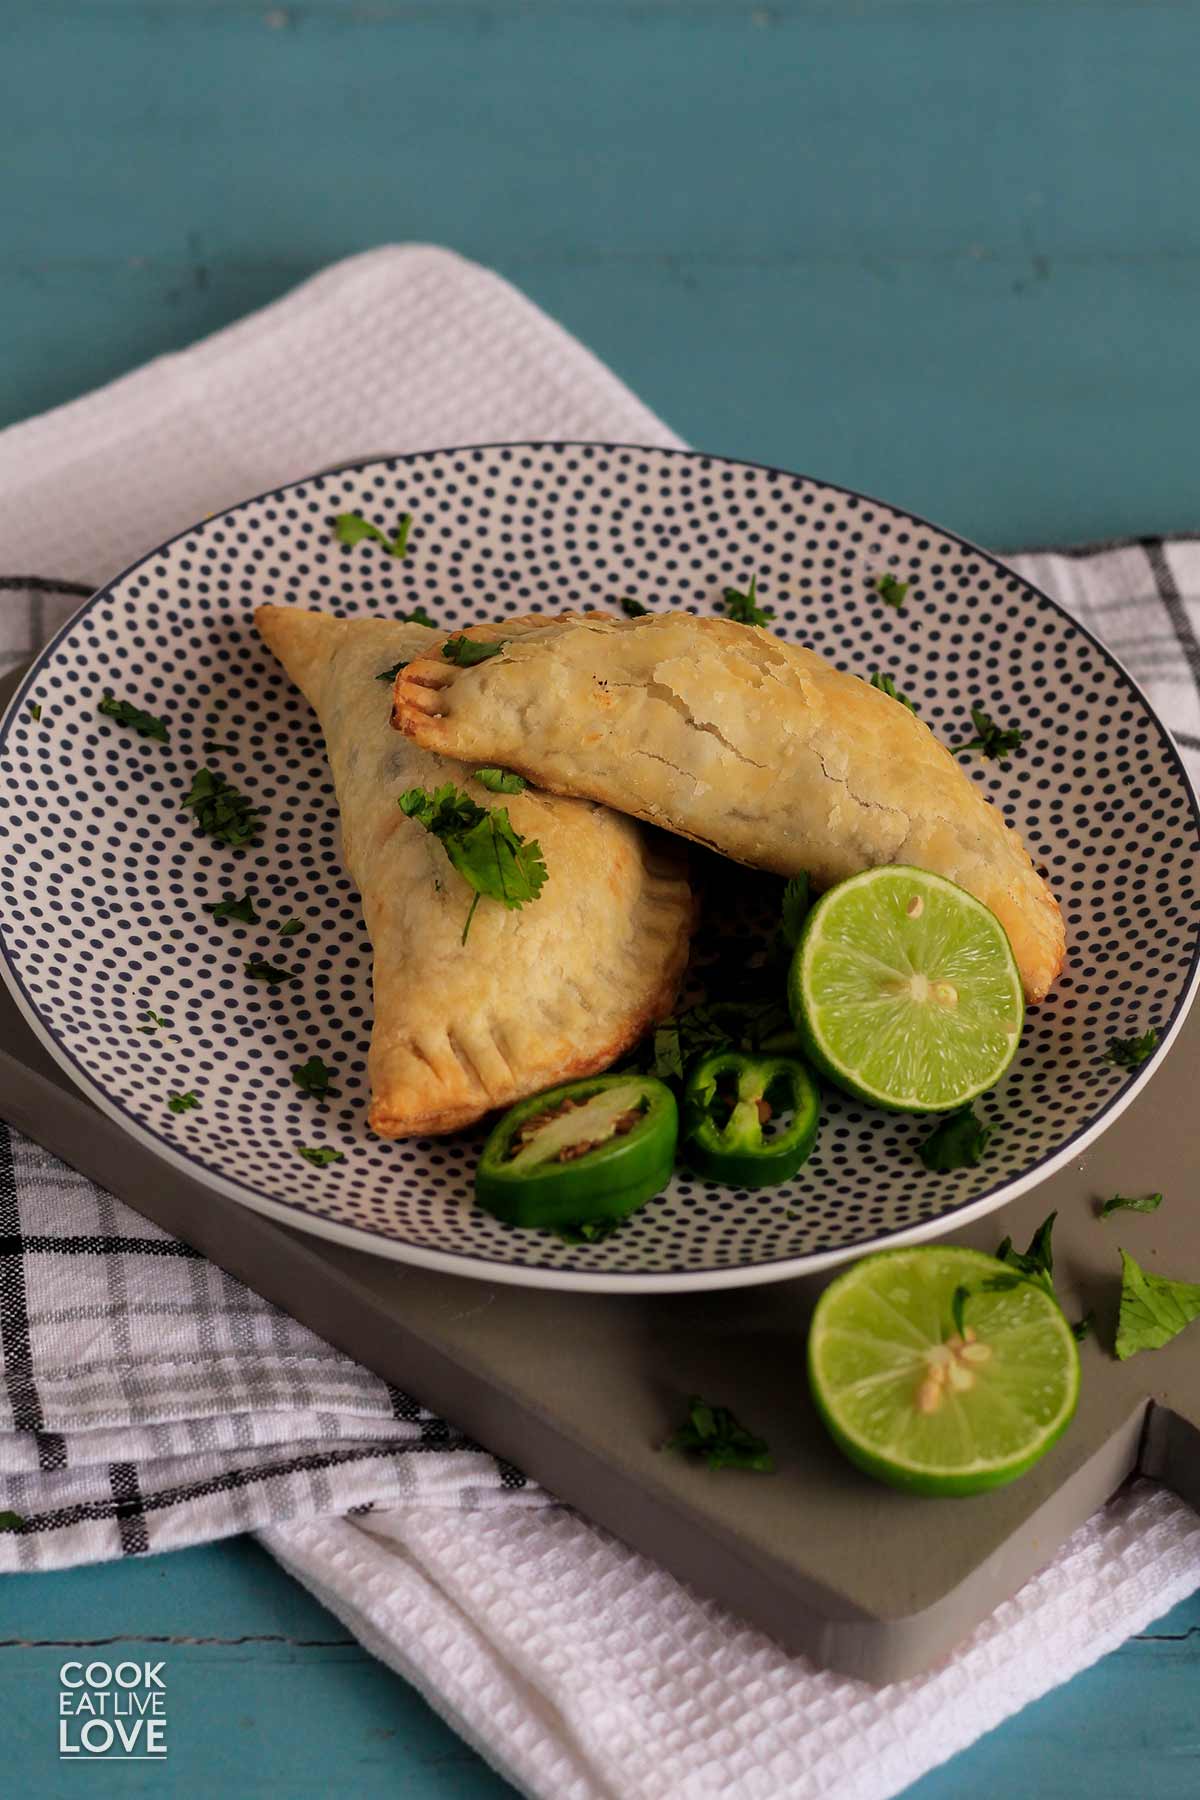 Overhead of cooked and ready empanadas on rectangle and white gray polka dot plates.